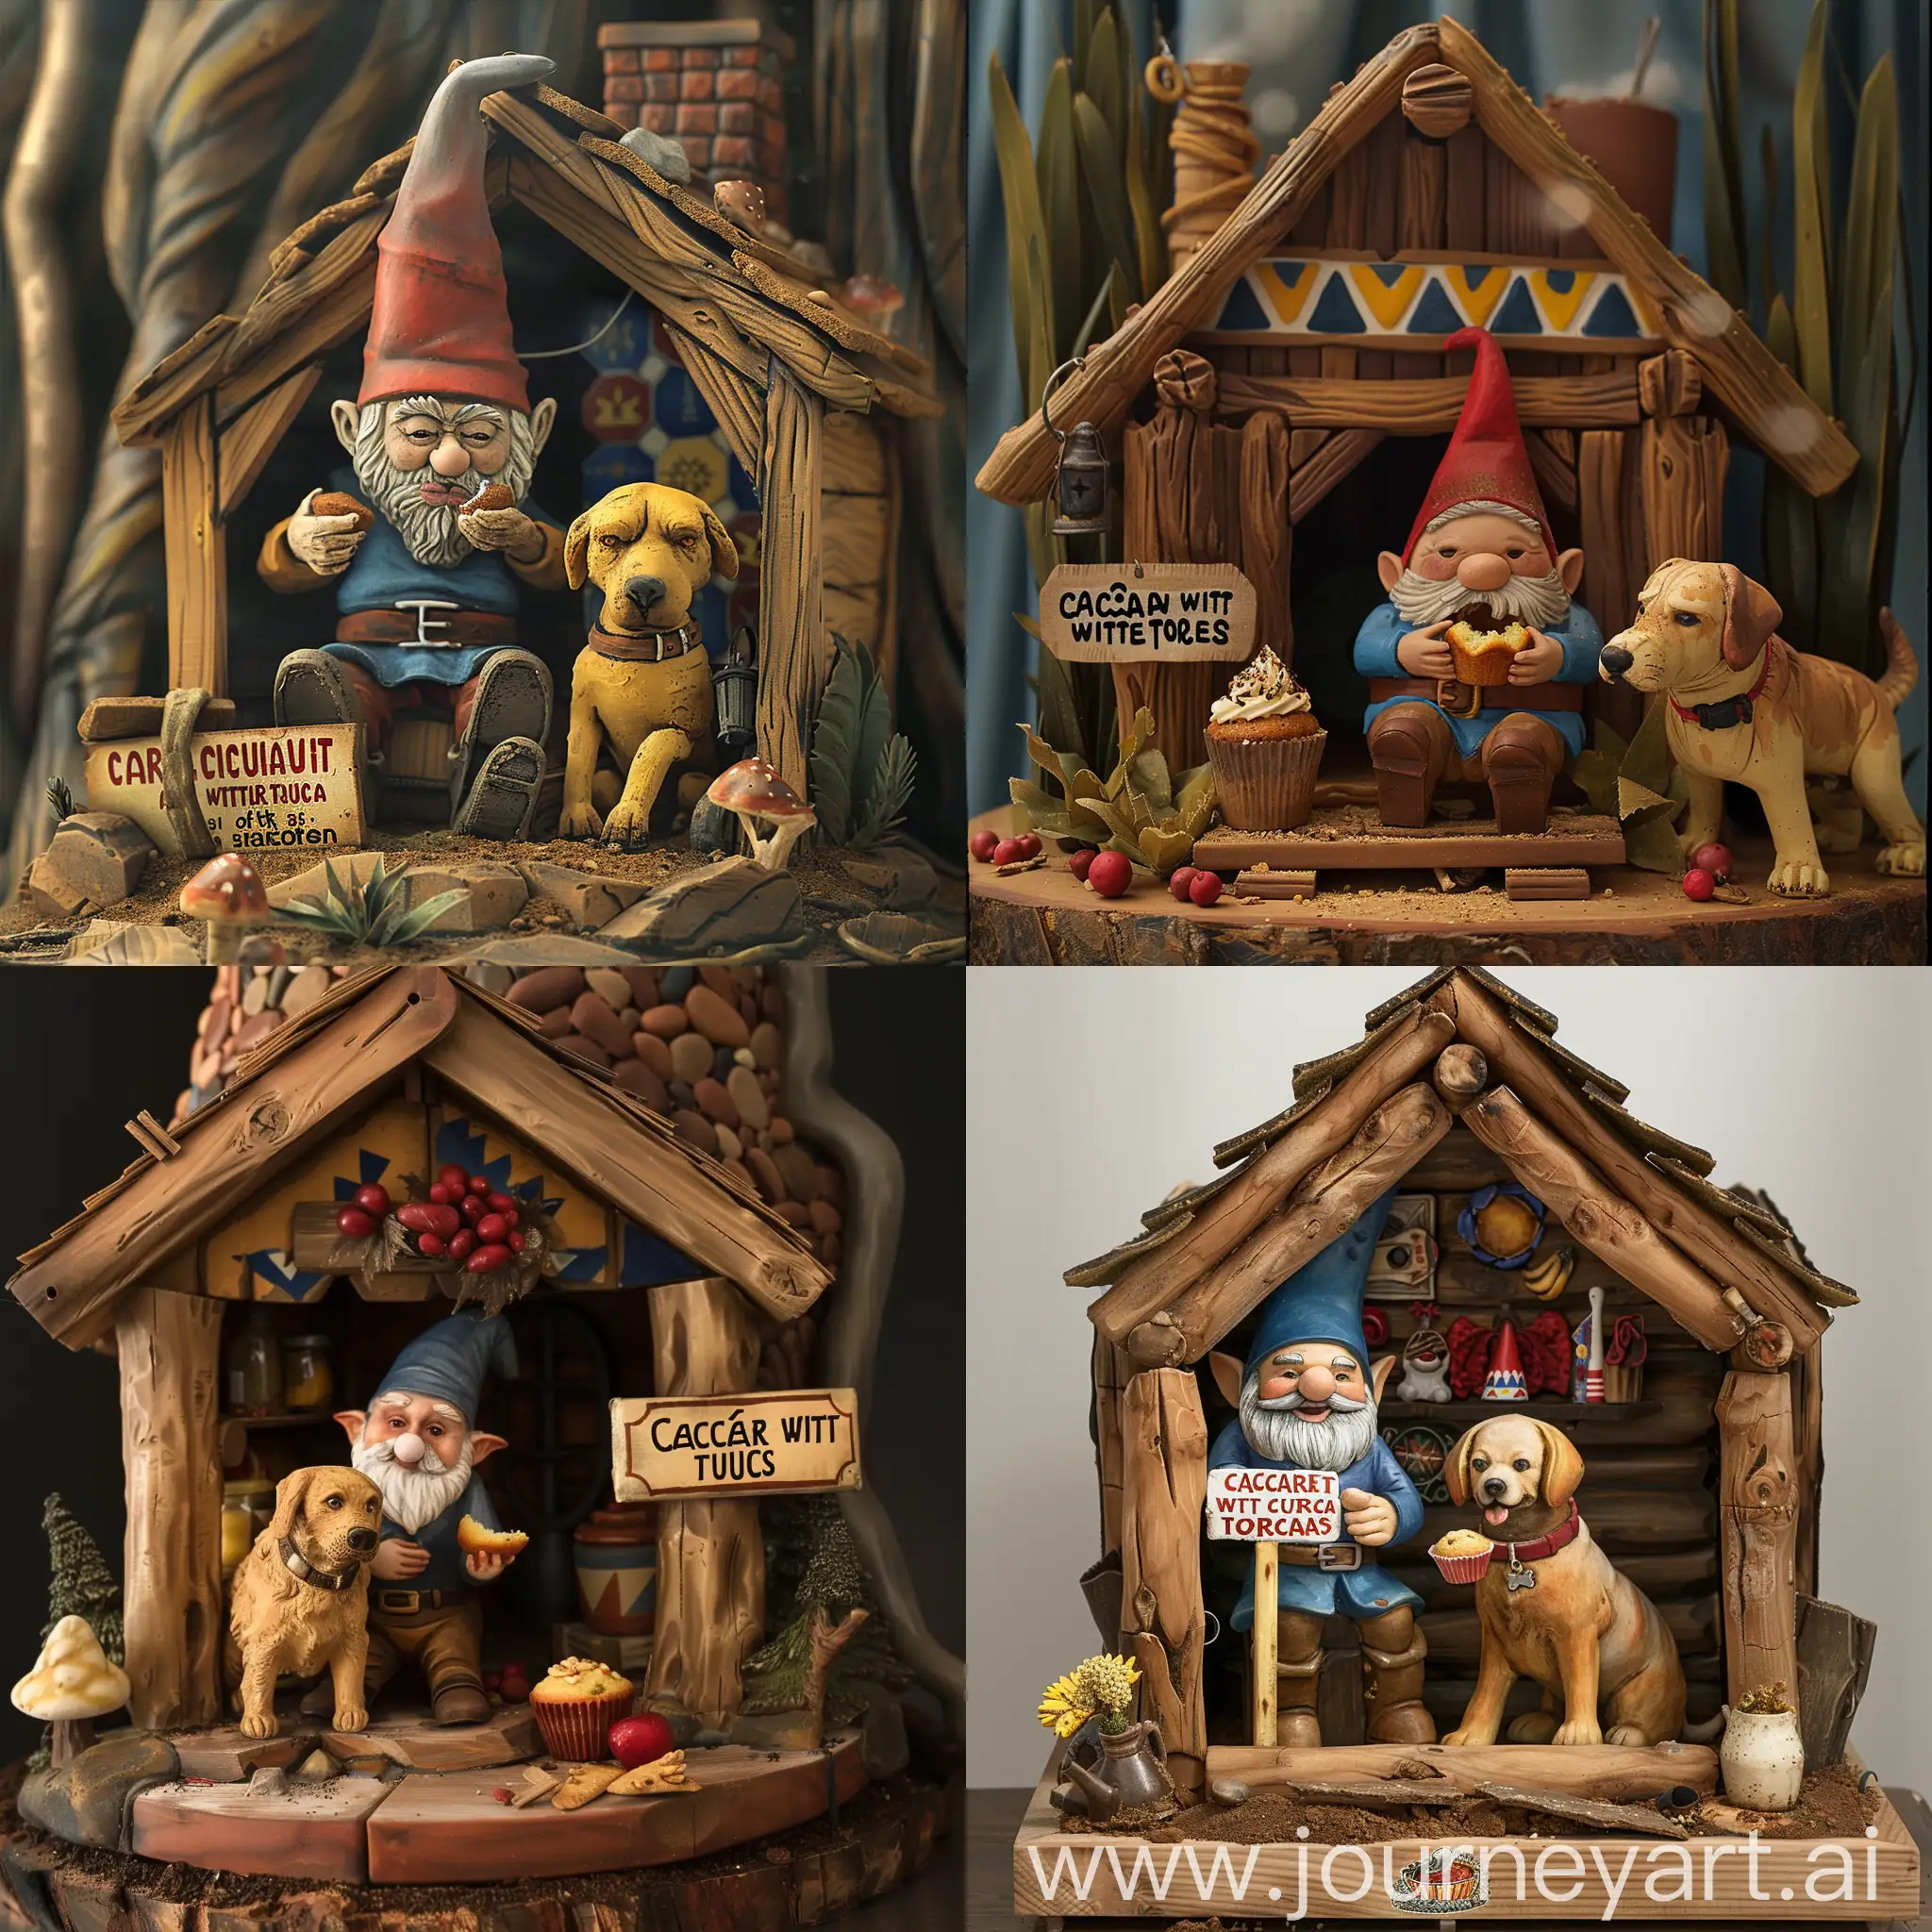 Gnome-Enjoying-Muffins-with-his-Dog-in-Cozy-Cabin